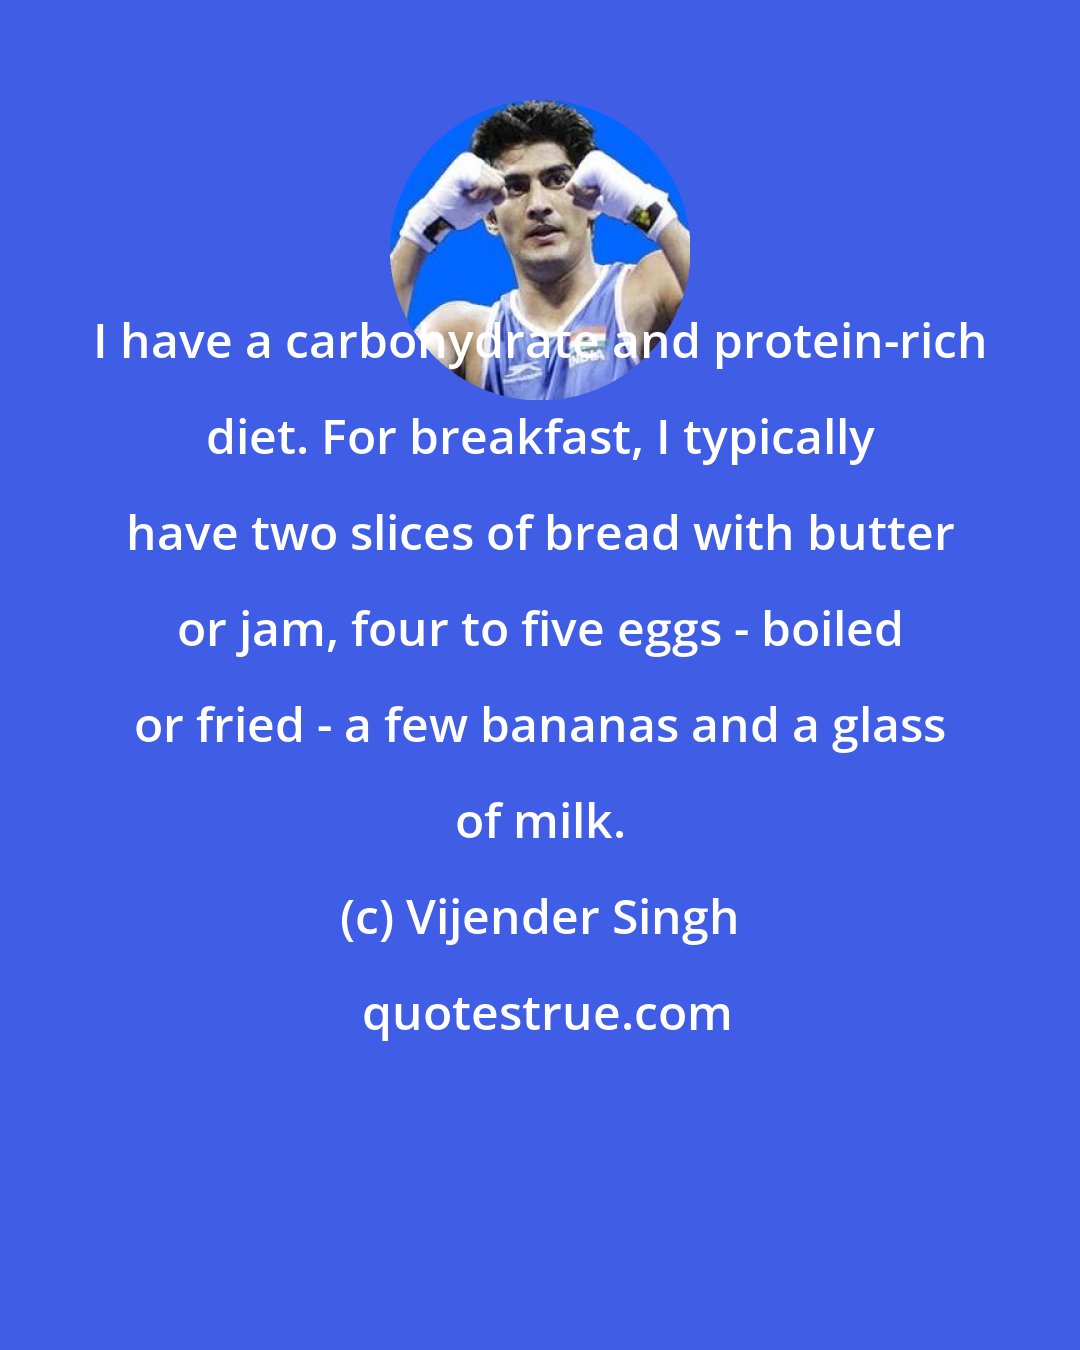 Vijender Singh: I have a carbohydrate and protein-rich diet. For breakfast, I typically have two slices of bread with butter or jam, four to five eggs - boiled or fried - a few bananas and a glass of milk.